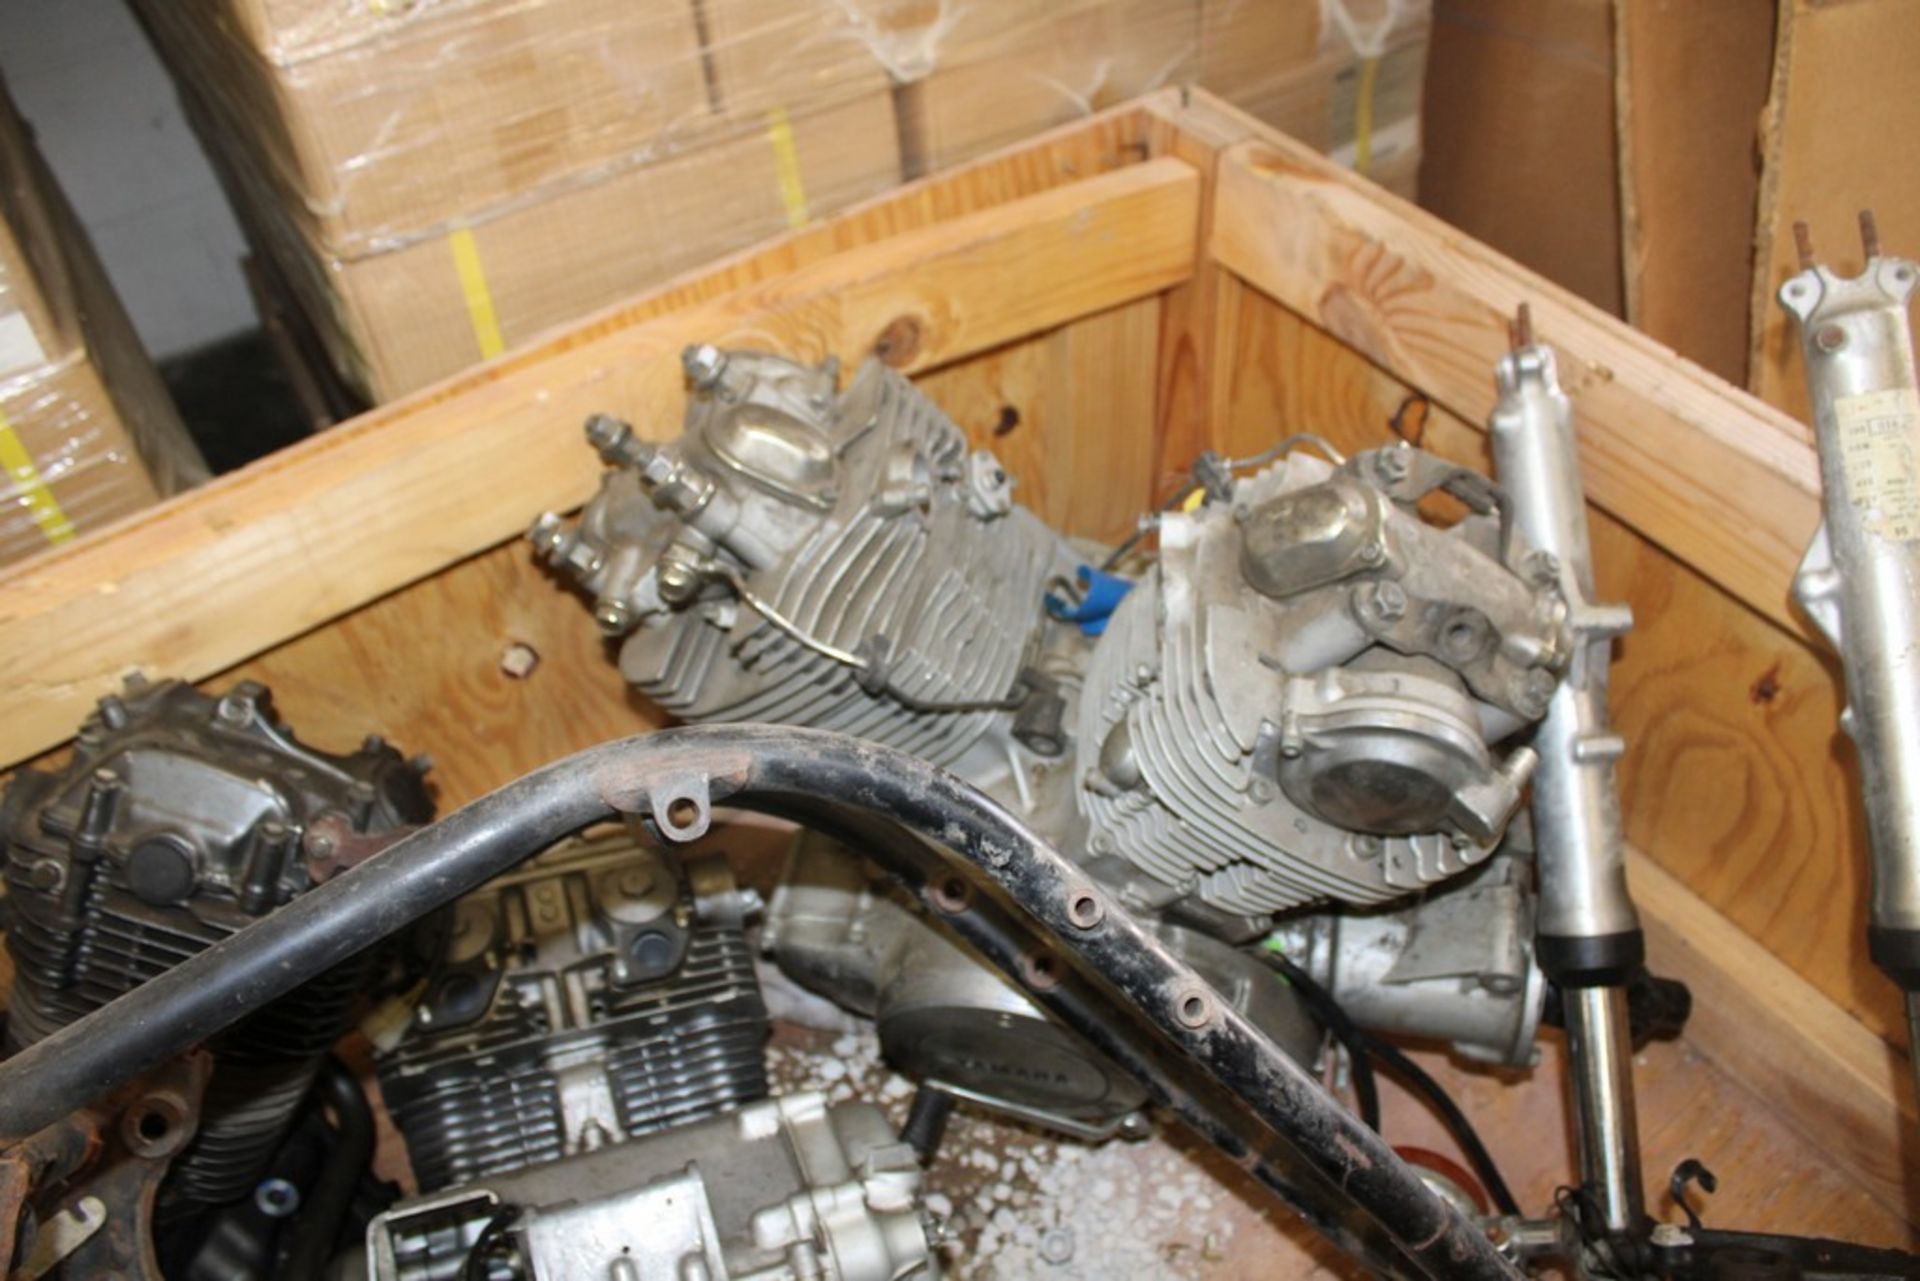 LARGE QTY OF MOTORCYCLE PARTS, MOTORS, FRAME, SEAT, ETC. - Image 4 of 6